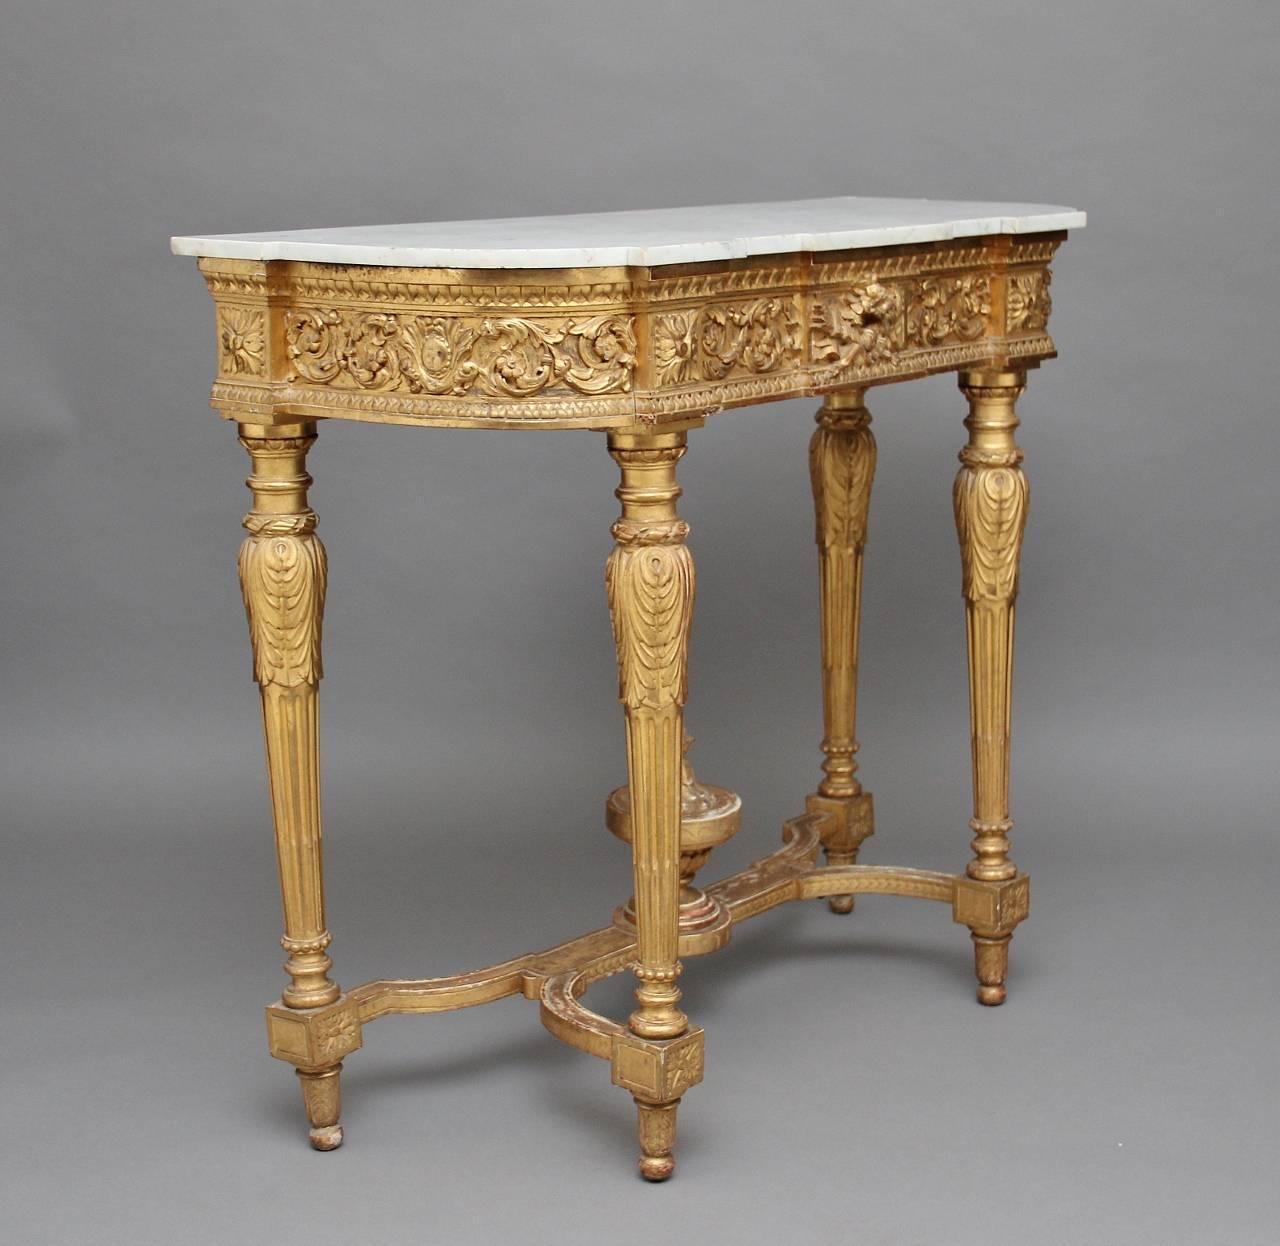 19th century gilt and marble-top console table of good proportions, the shaped white marble-top resting on the frieze which is profusely carved with floral decoration, with four carved and fluted legs supported by a shaped stretcher with a bold